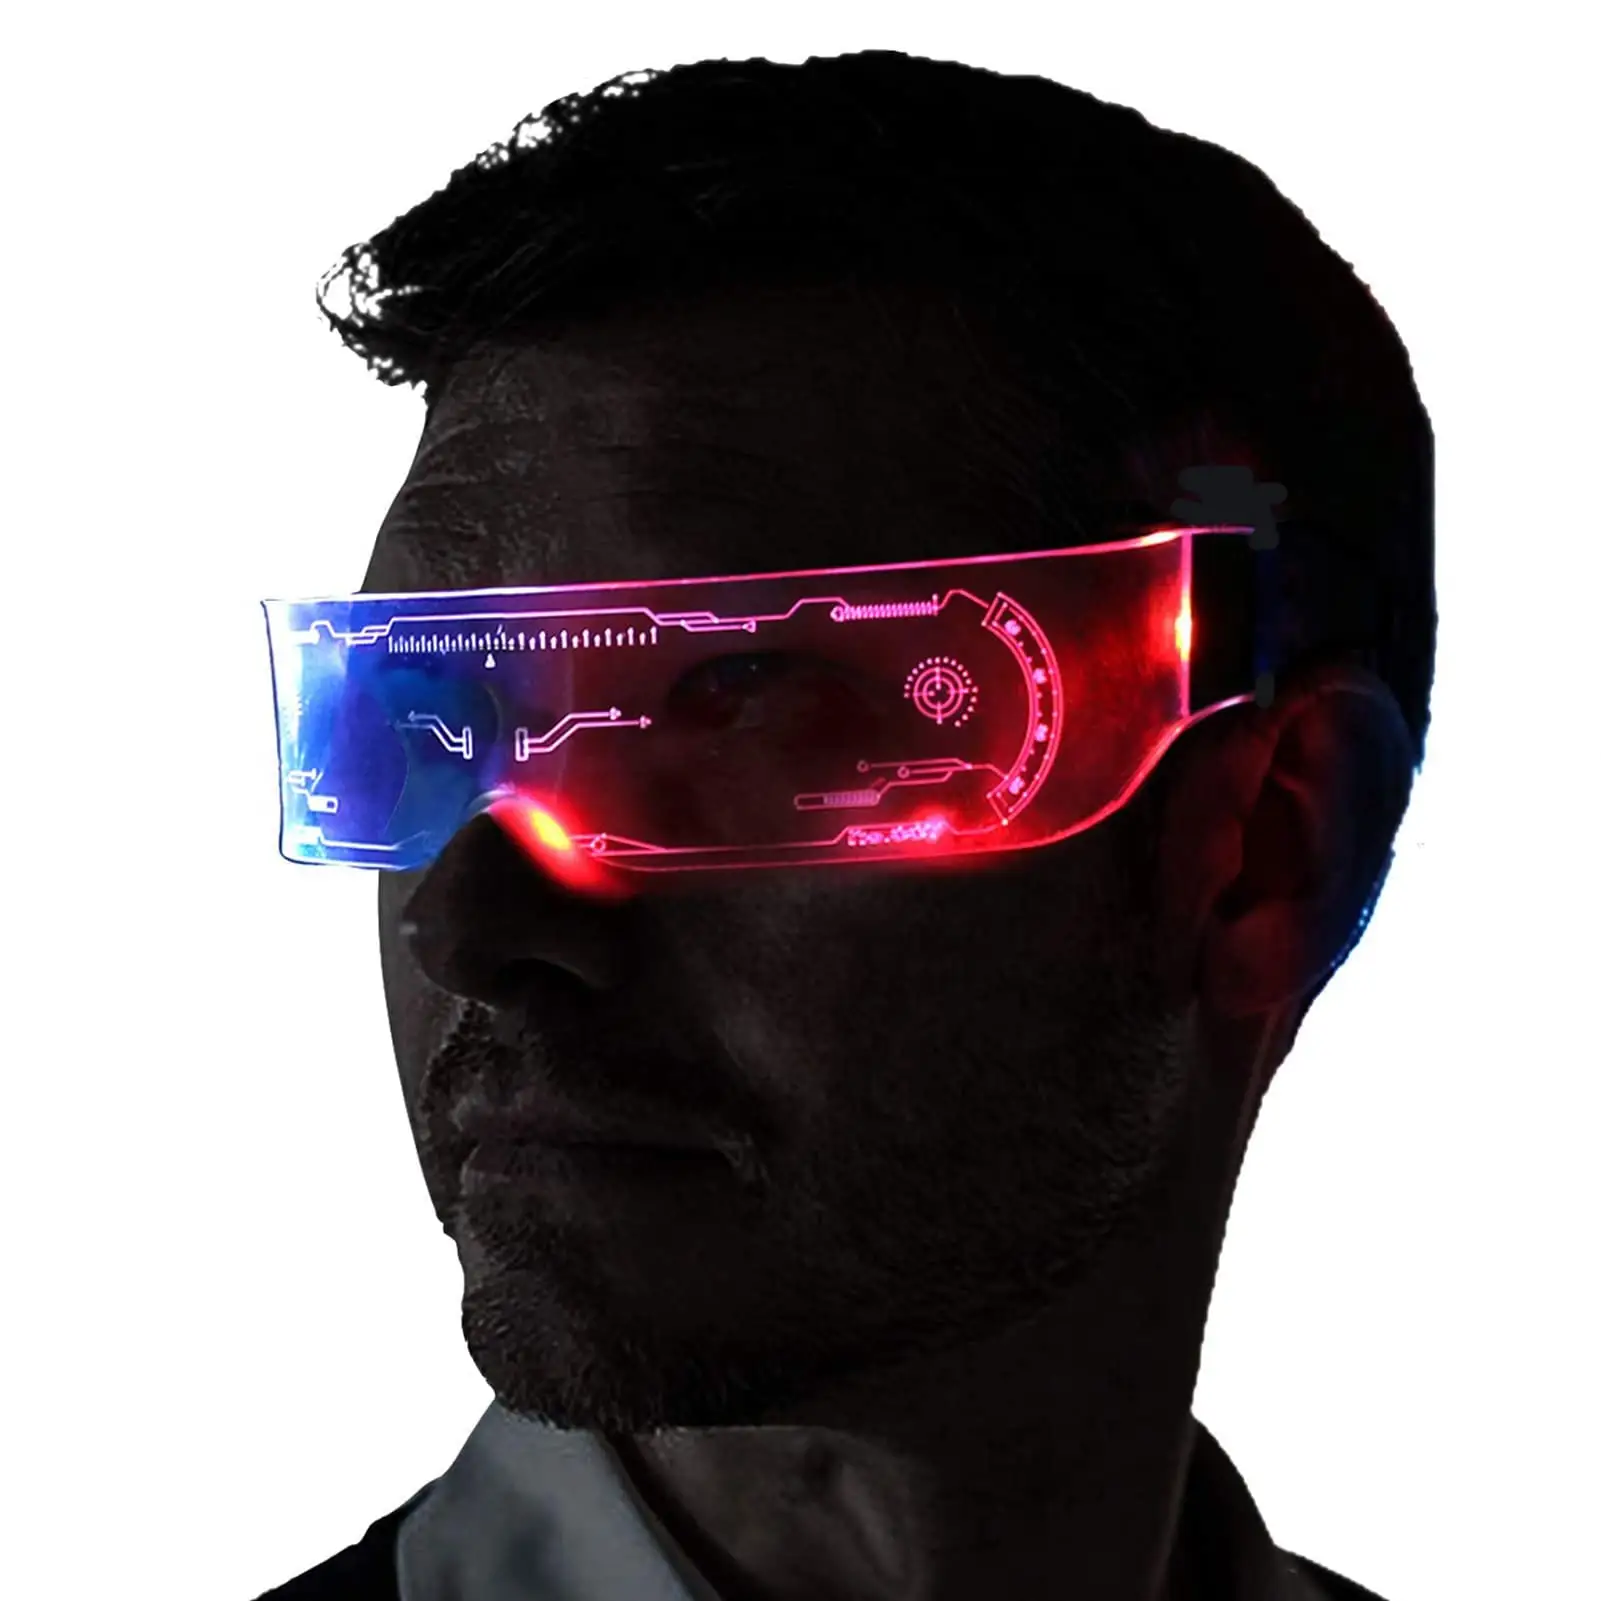 Light Up Led Glasses Flashing/Fixed Light Colors flashing in The Dark Party Futuristic style Glasses